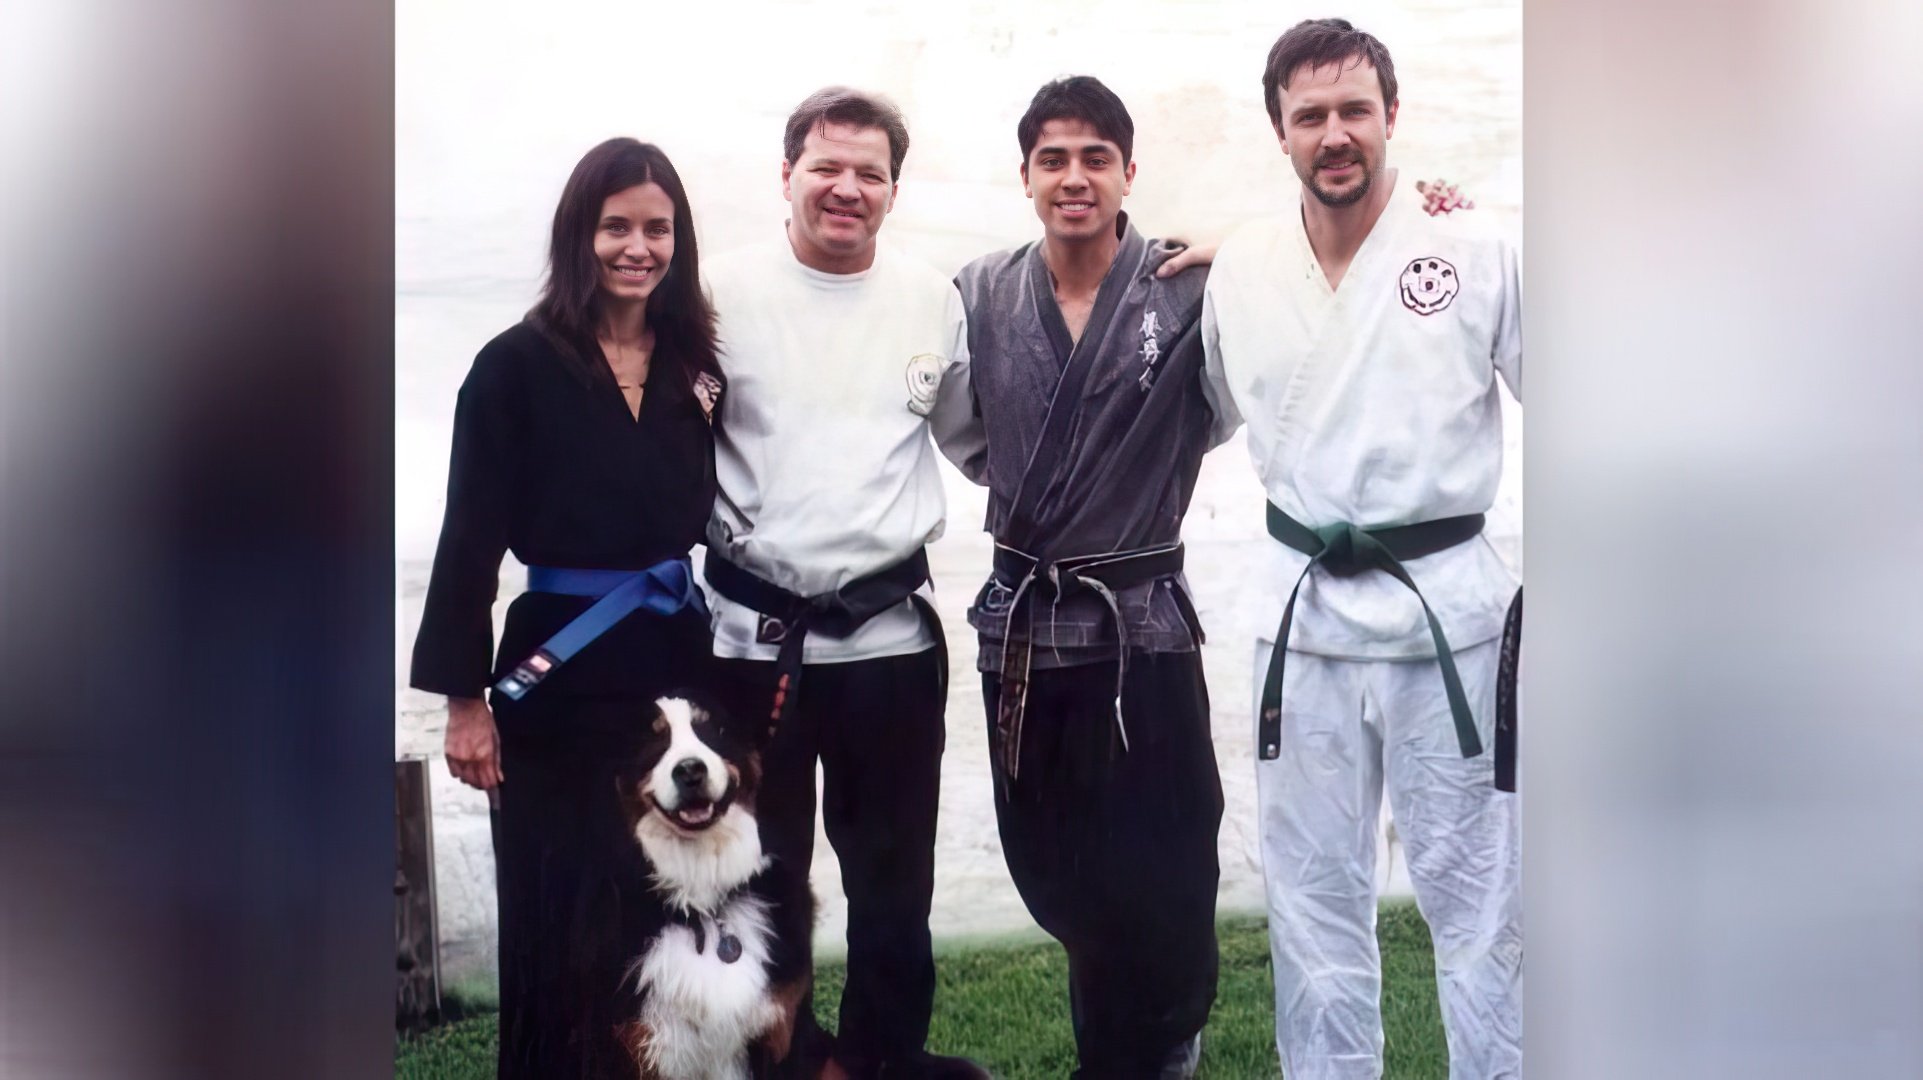 Courteney Cox has been practicing karate for many years